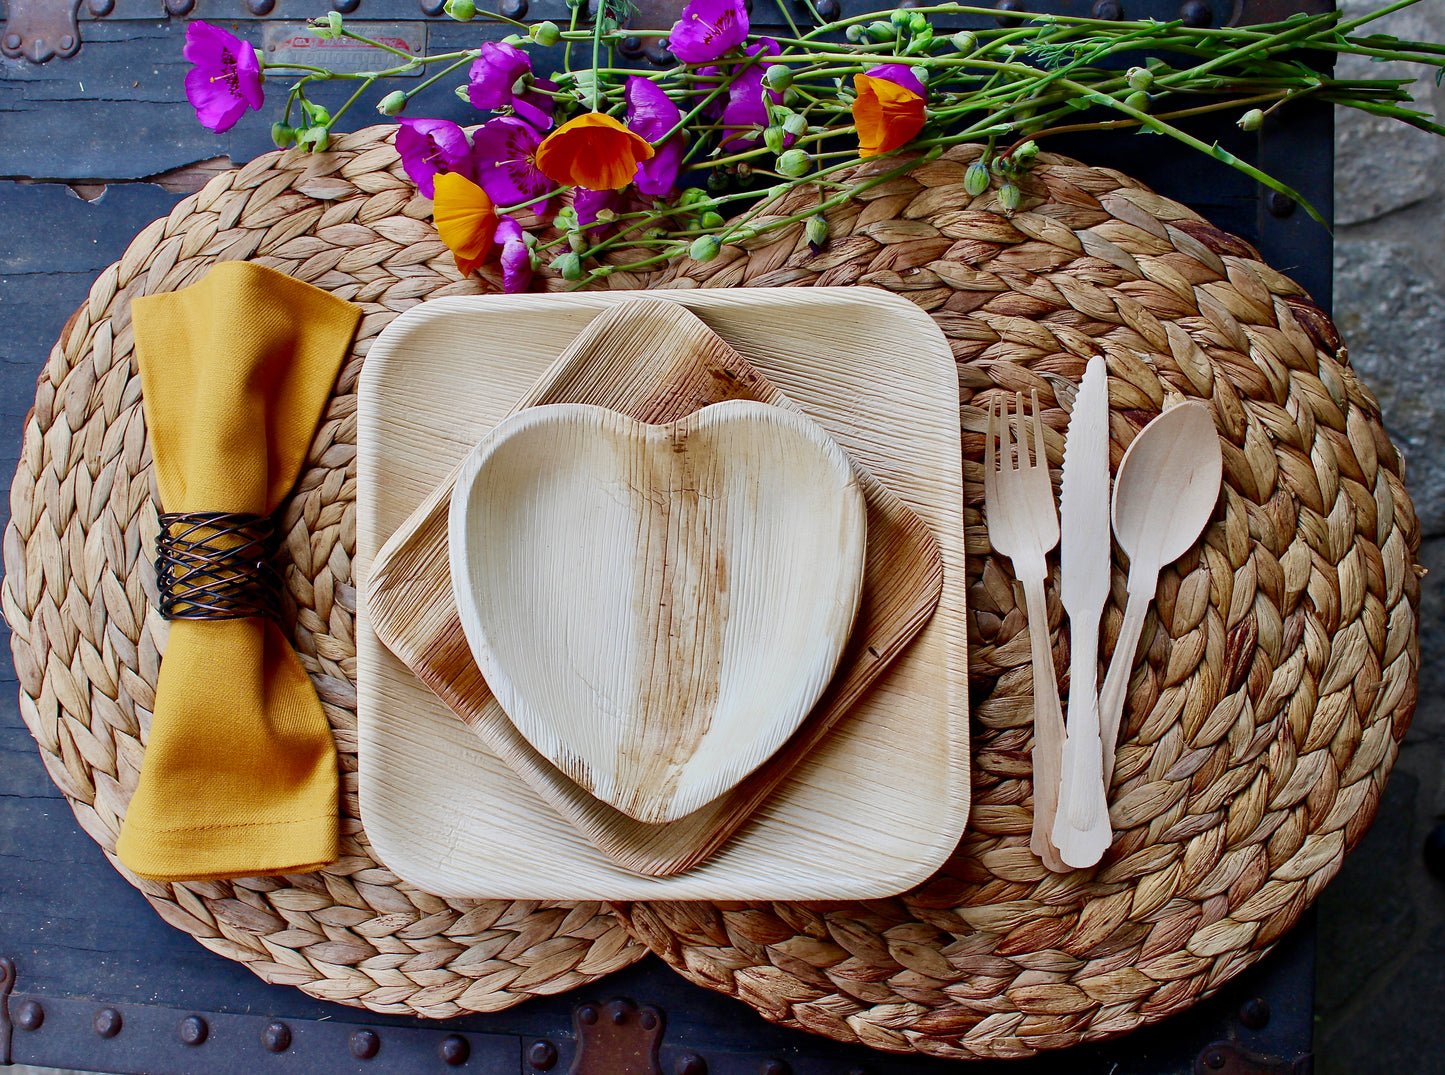 Palm leaf plate 25 pices 9.5" Square plates ane 75 pices cutlery compostable and Biodegradable heavy Duty - event - party